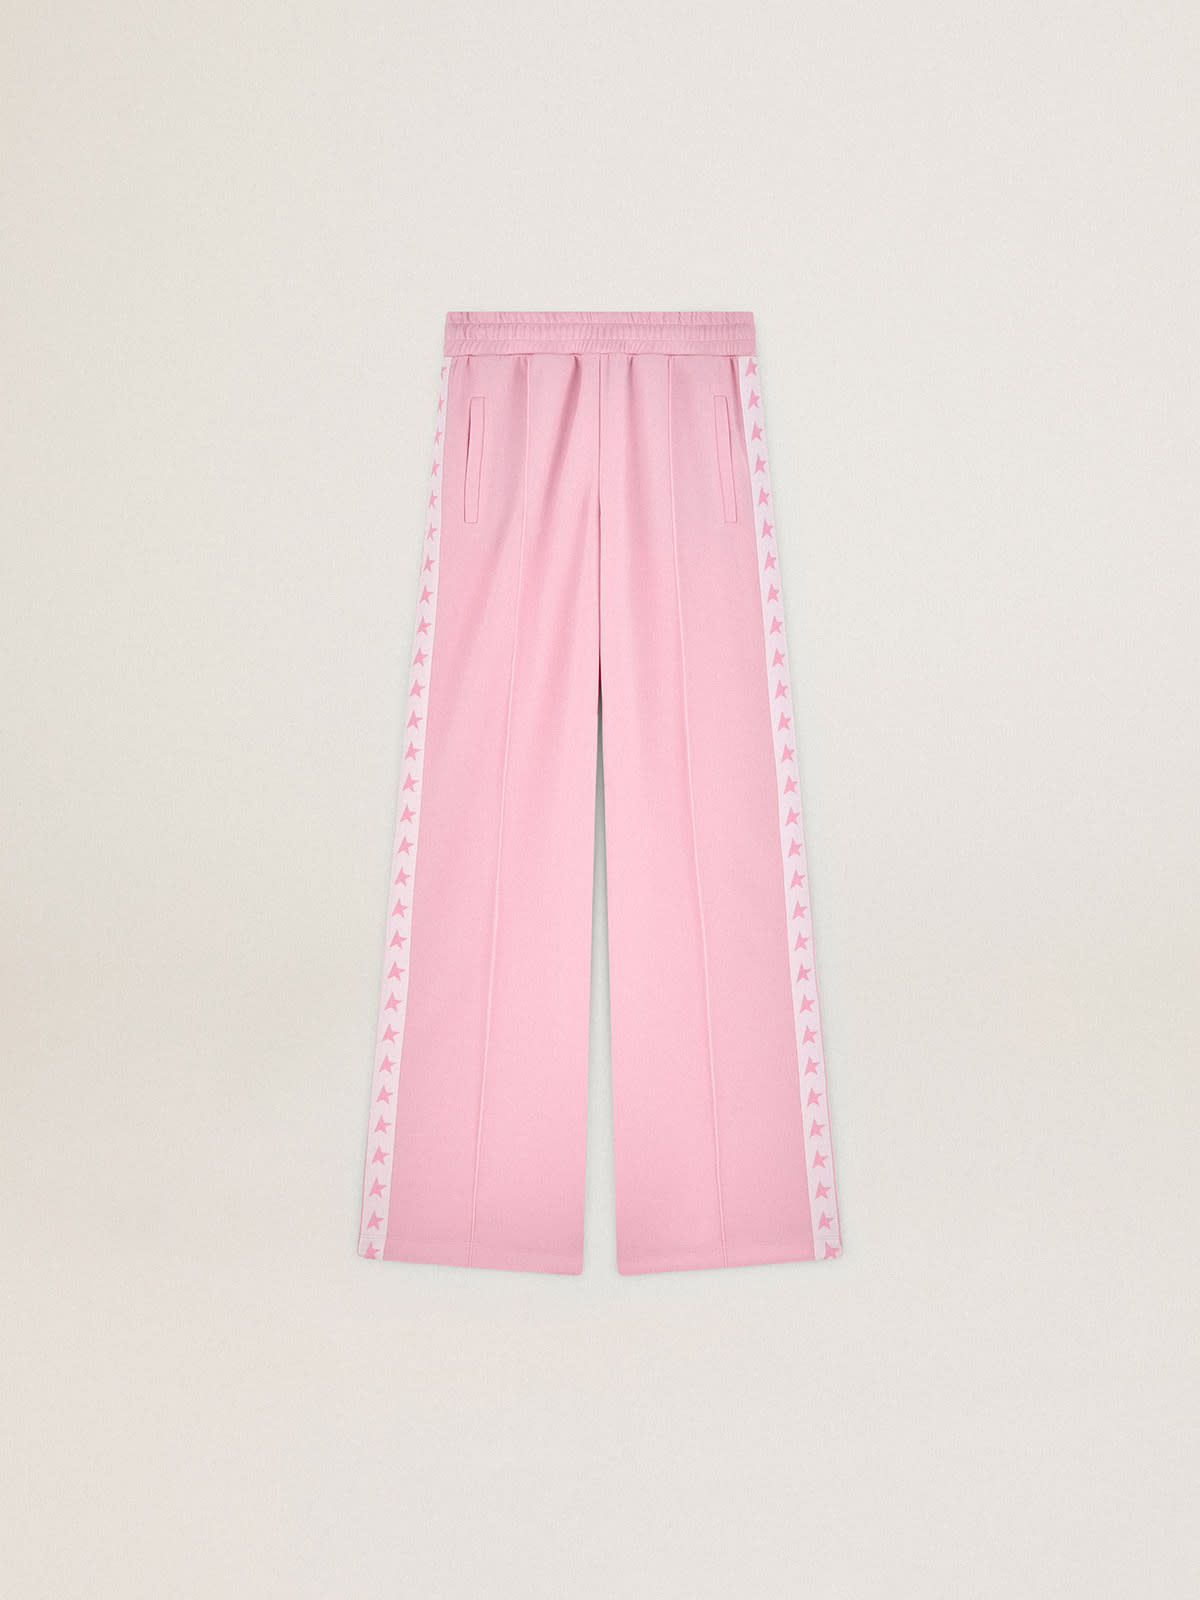 Golden Goose - Pink Dorotea Star Collection jogging pants with white strip and pink stars on the sides in 